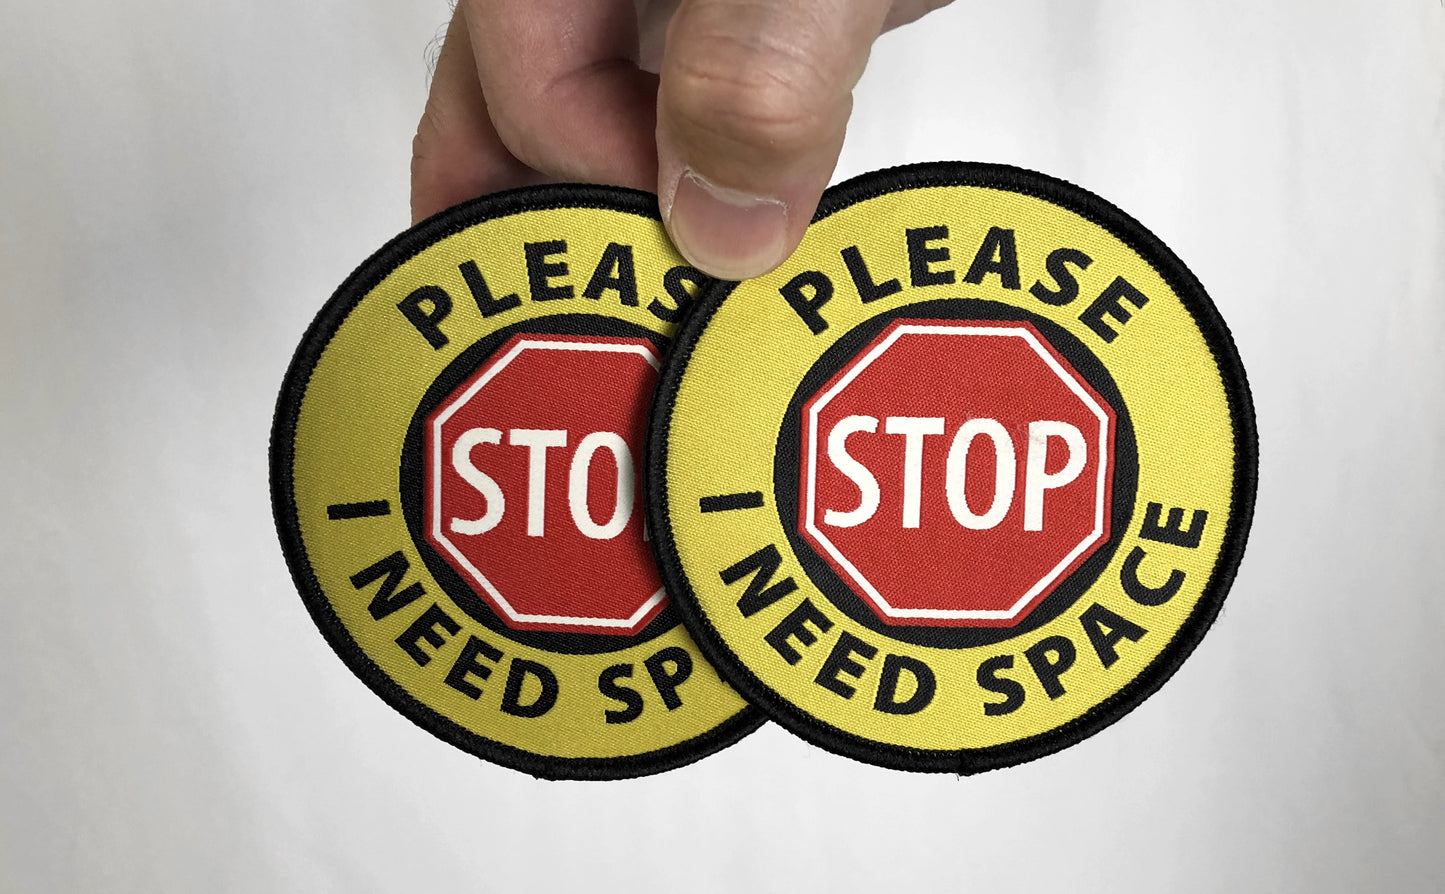 "I need space/Do Not Distract" Warning Badges